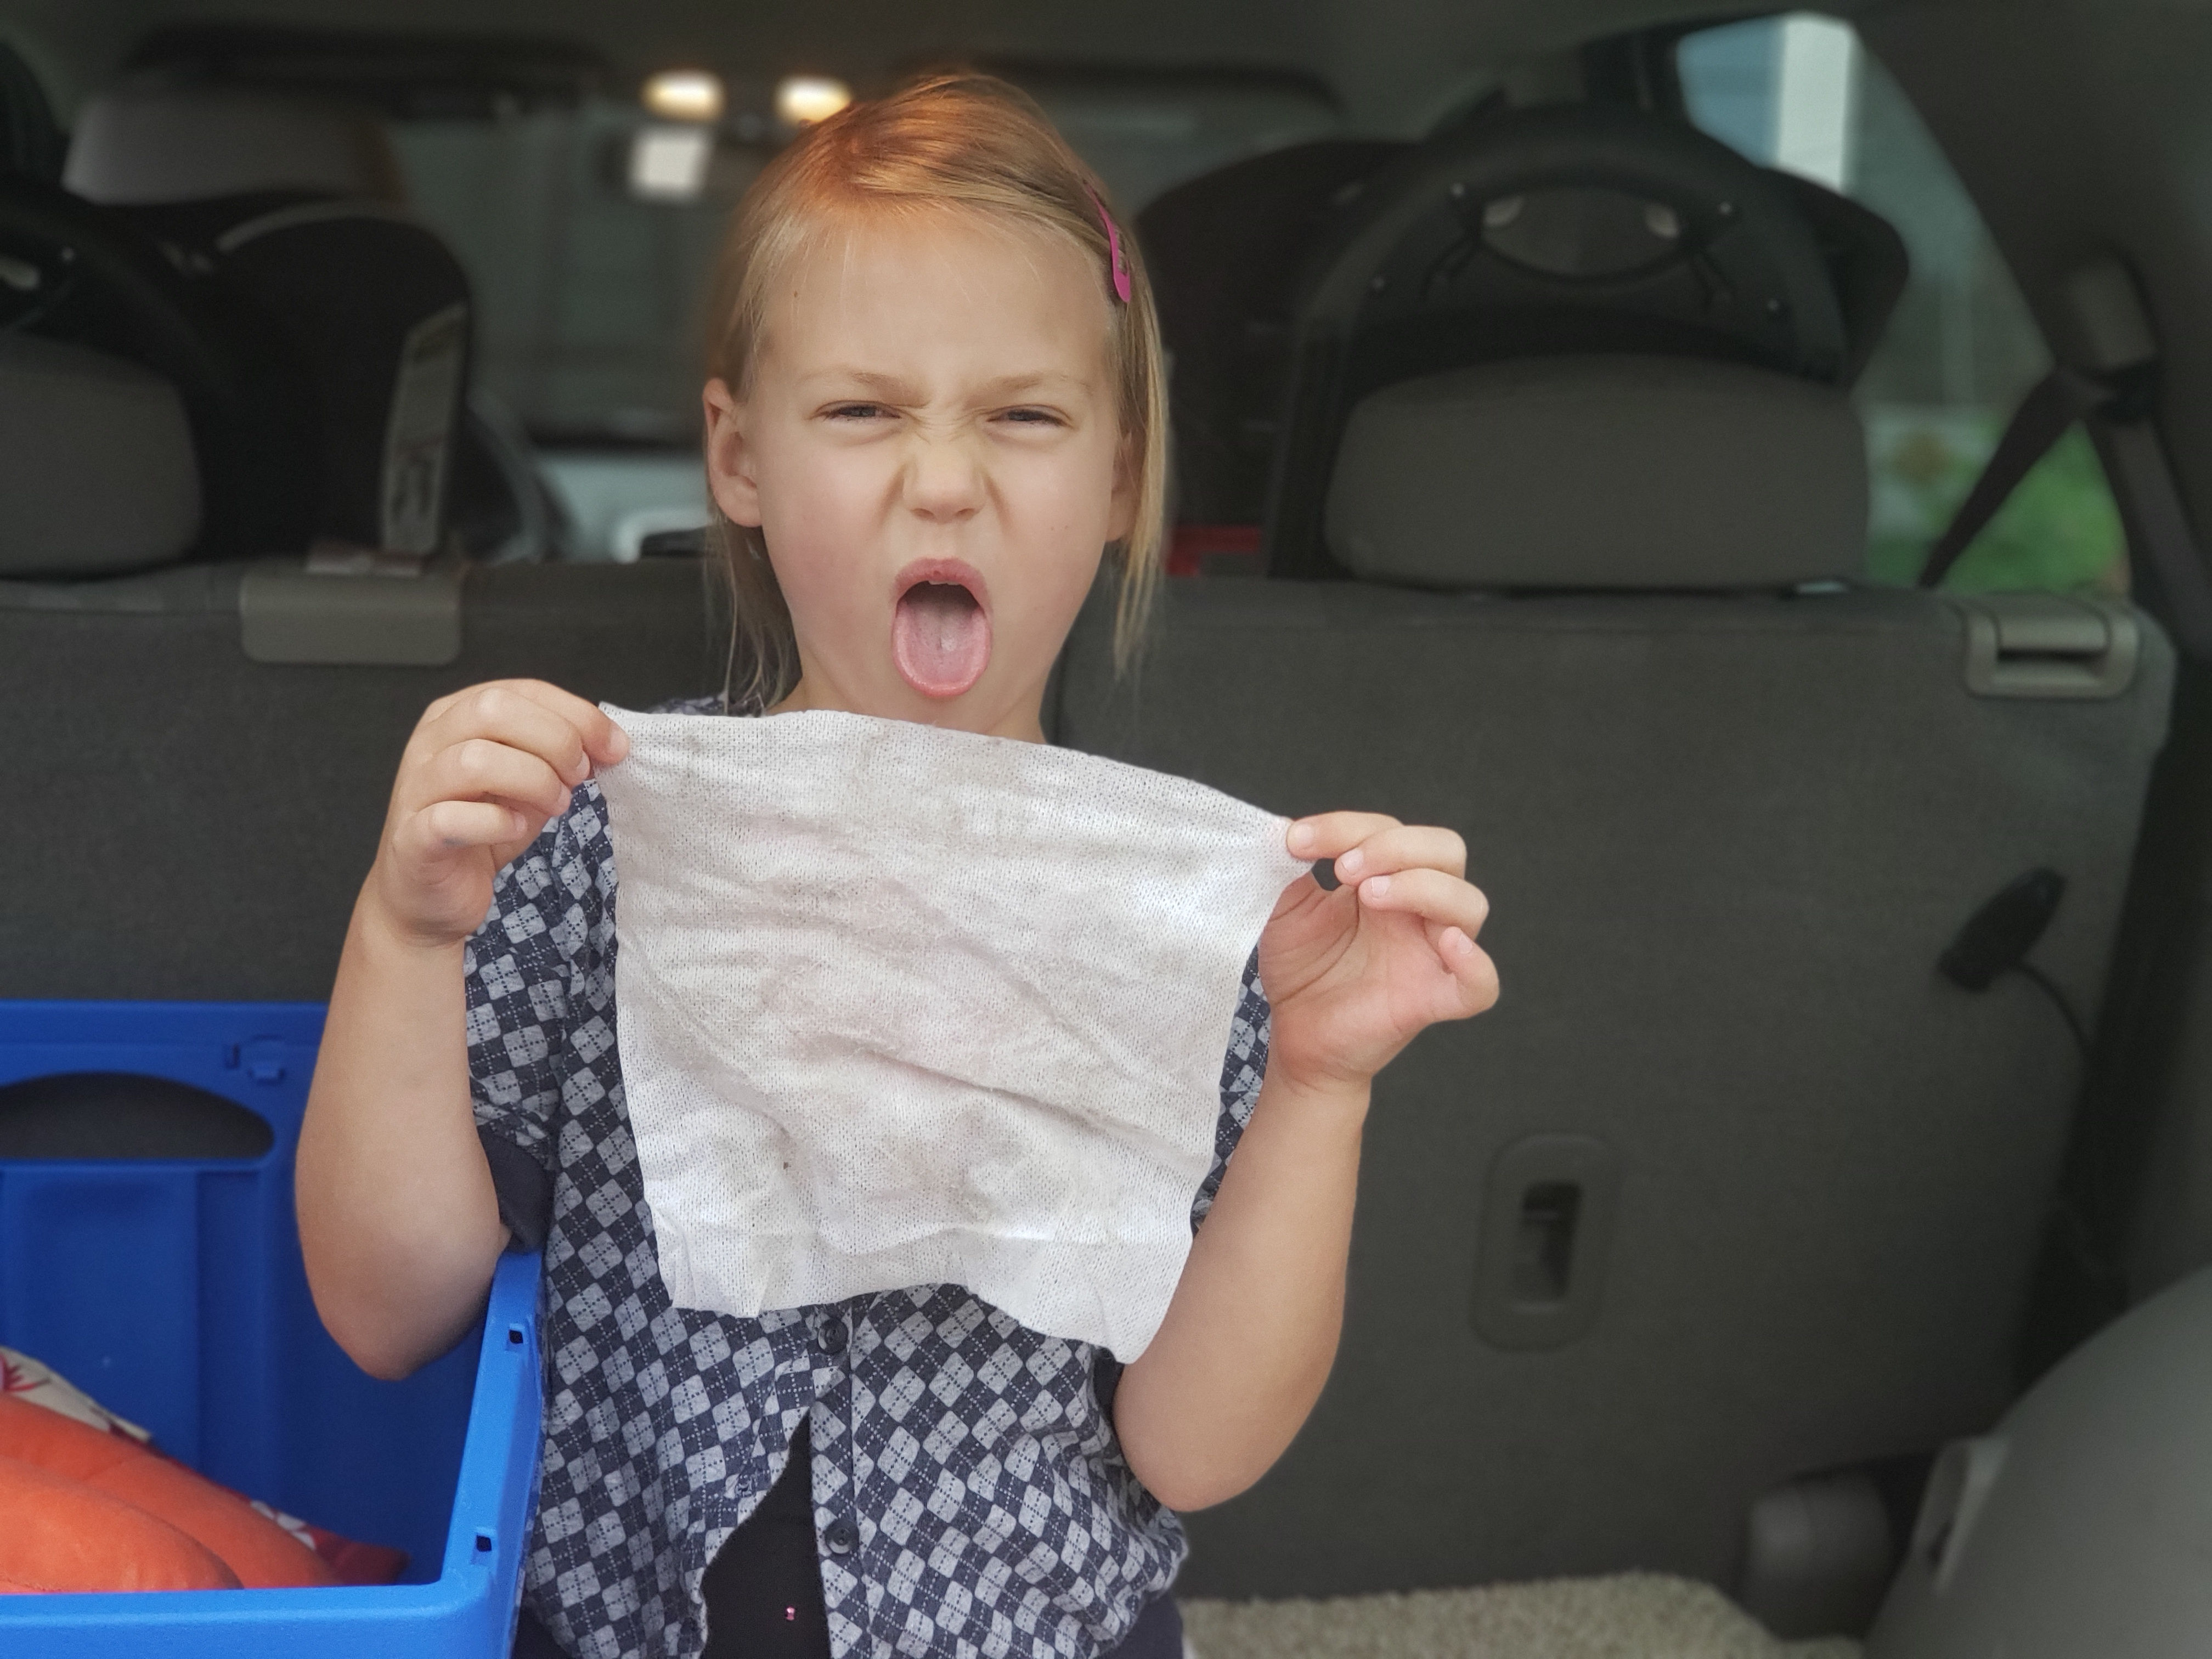 https://exploringdomesticity.com/wp-content/uploads/2019/09/Cleaning-a-dirty-Mom-Car-with-Armor-All-cleaning-wipes.jpg